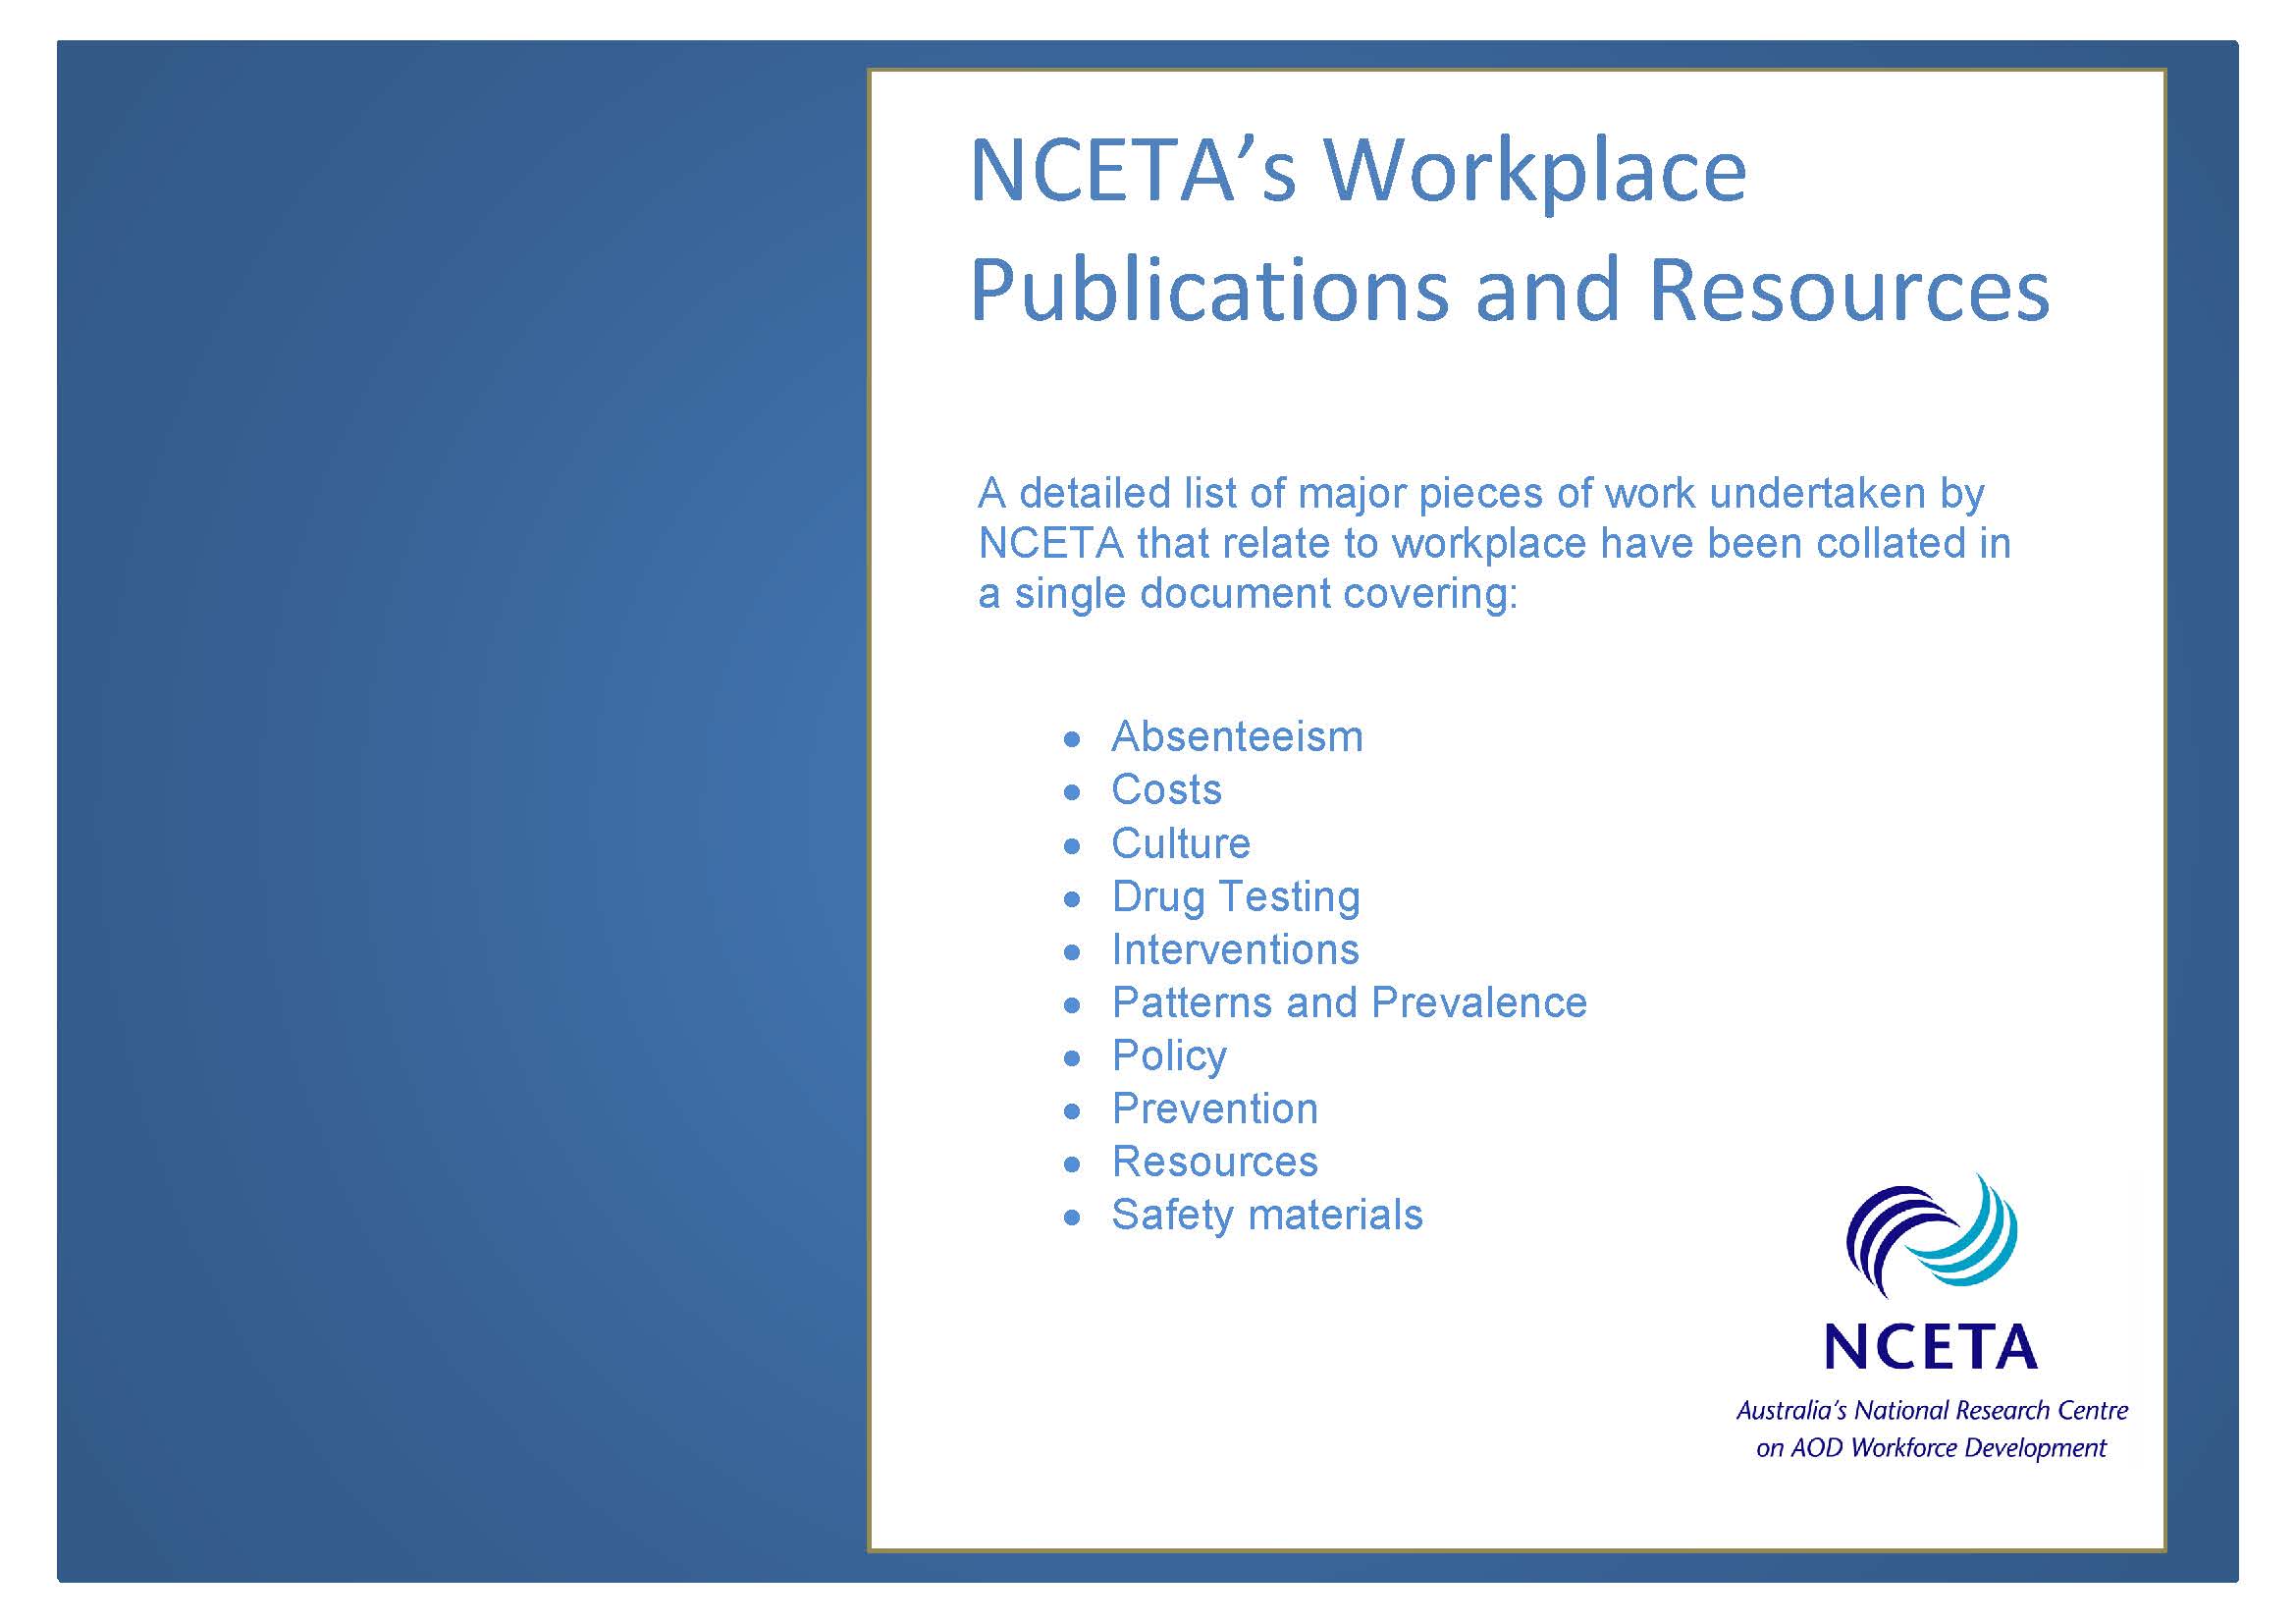 Pages_from_NCETA_Workplace_Publications_2005-2020.jpg